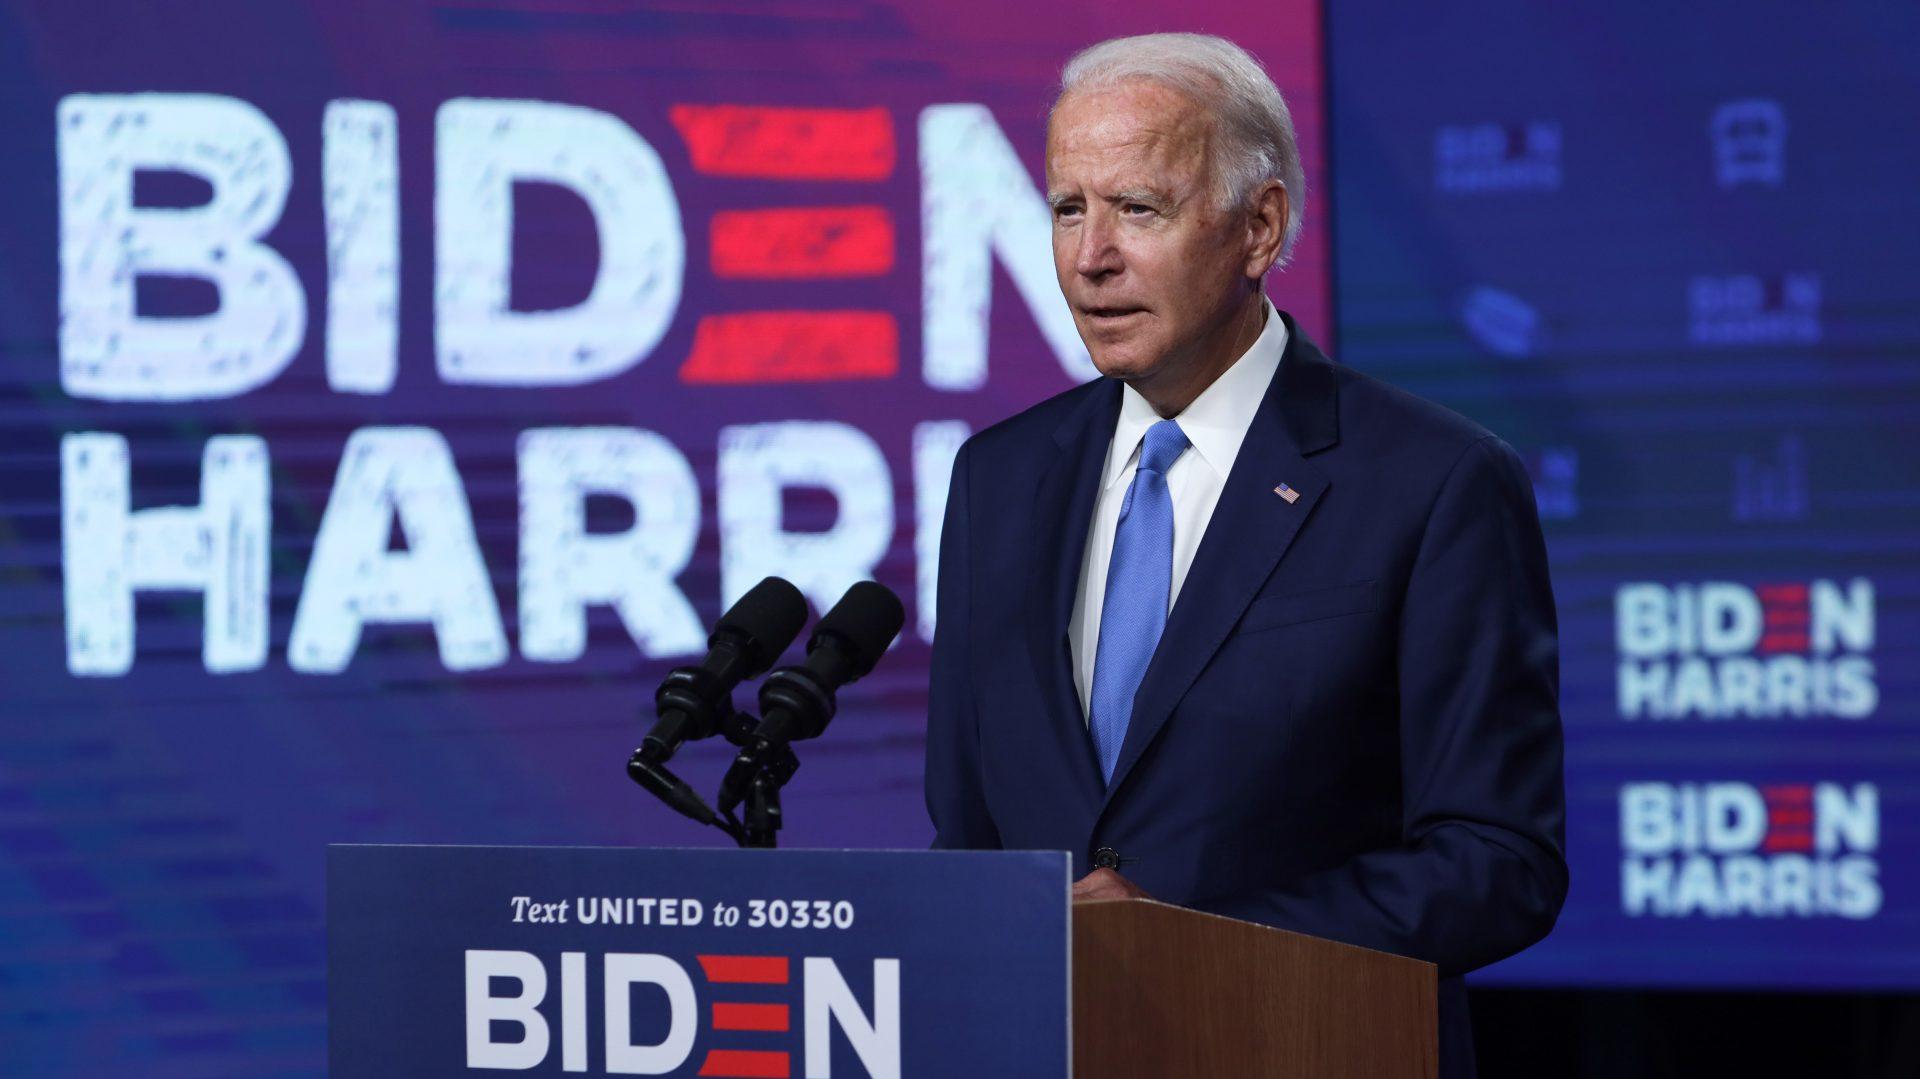 Labor Day bringing Biden to Harrisburg Harris and Pence to